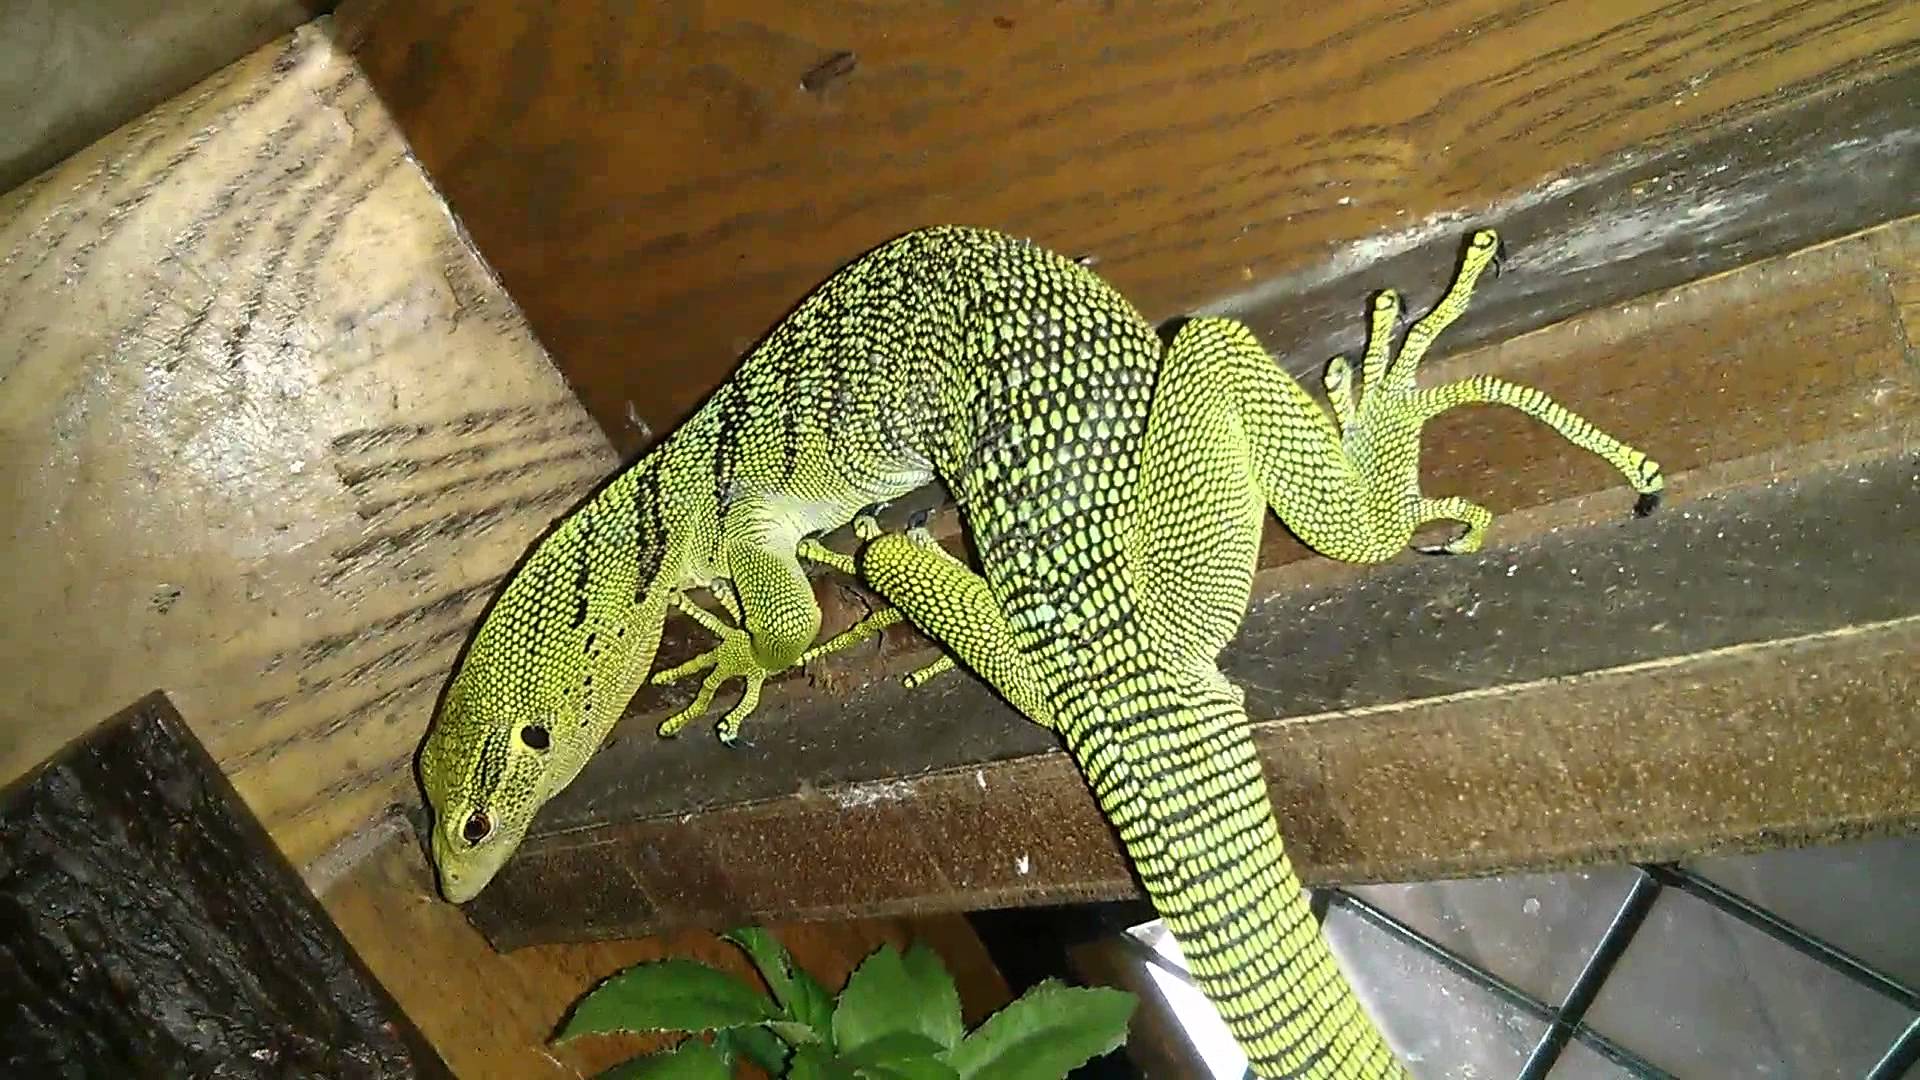 Green tree monitor in cage - YouTube